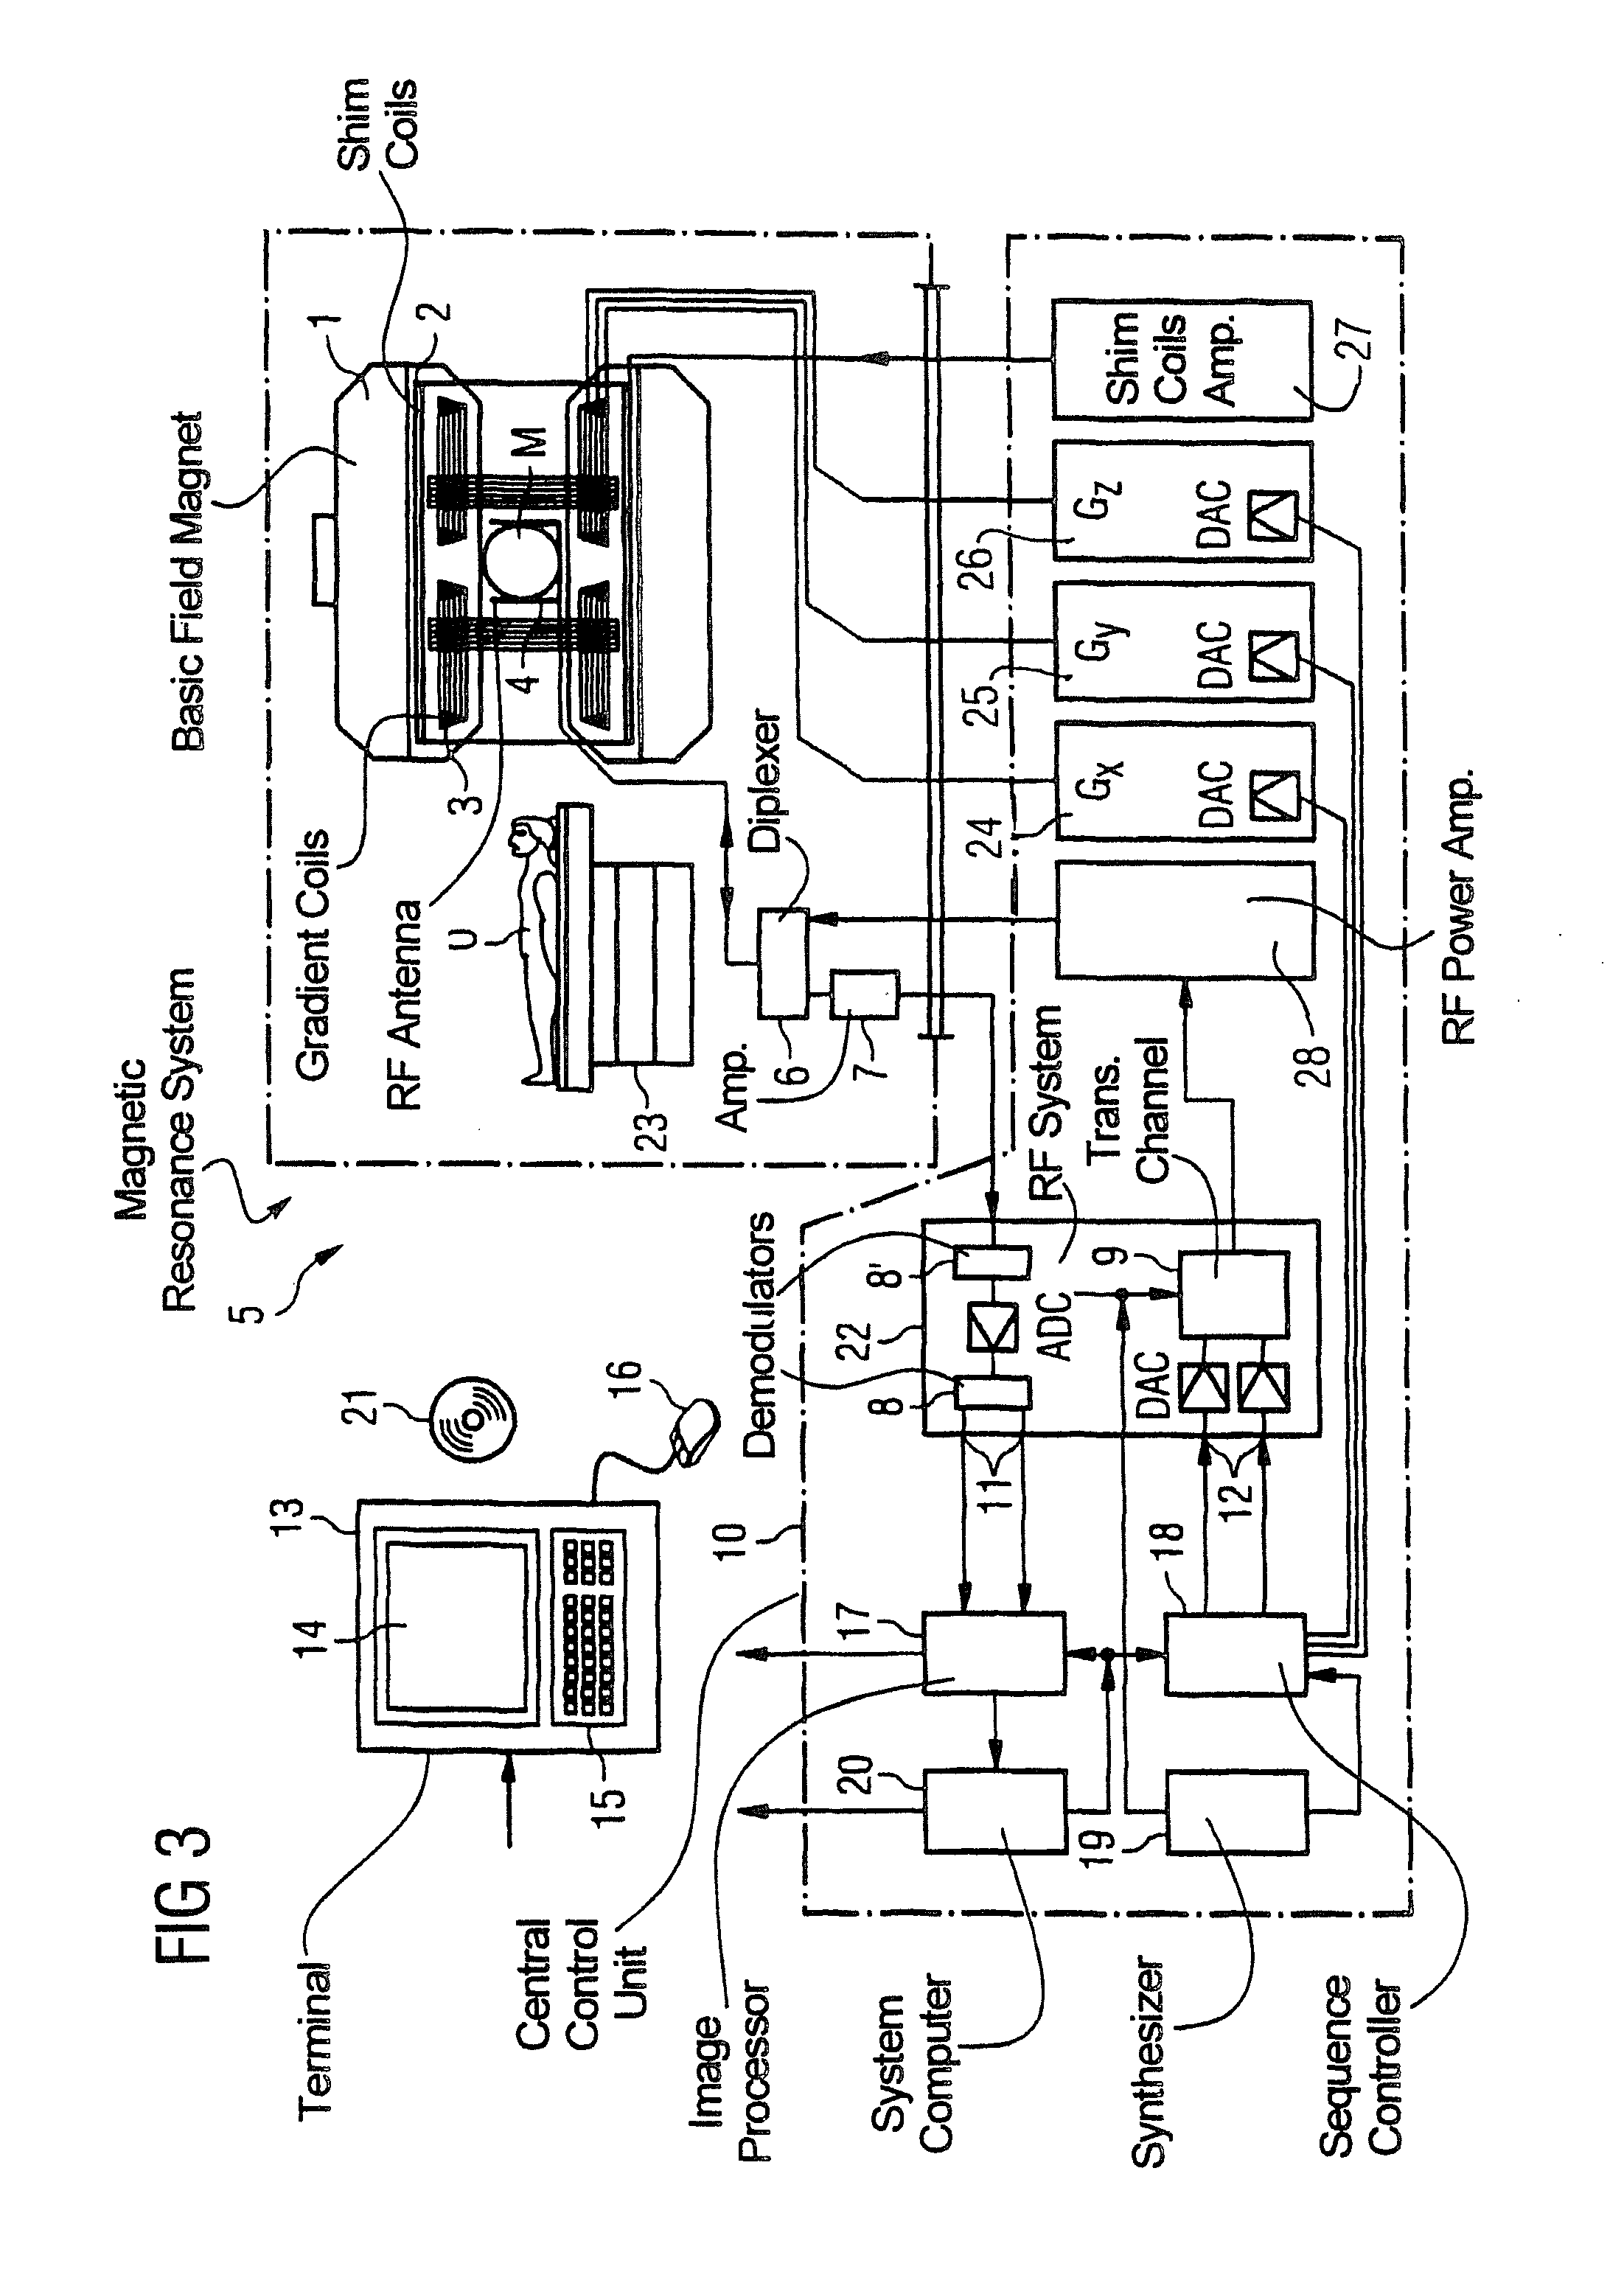 Method and magnetic resonance apparatus for non-selective excitation of nuclear spin signals in an examination subject